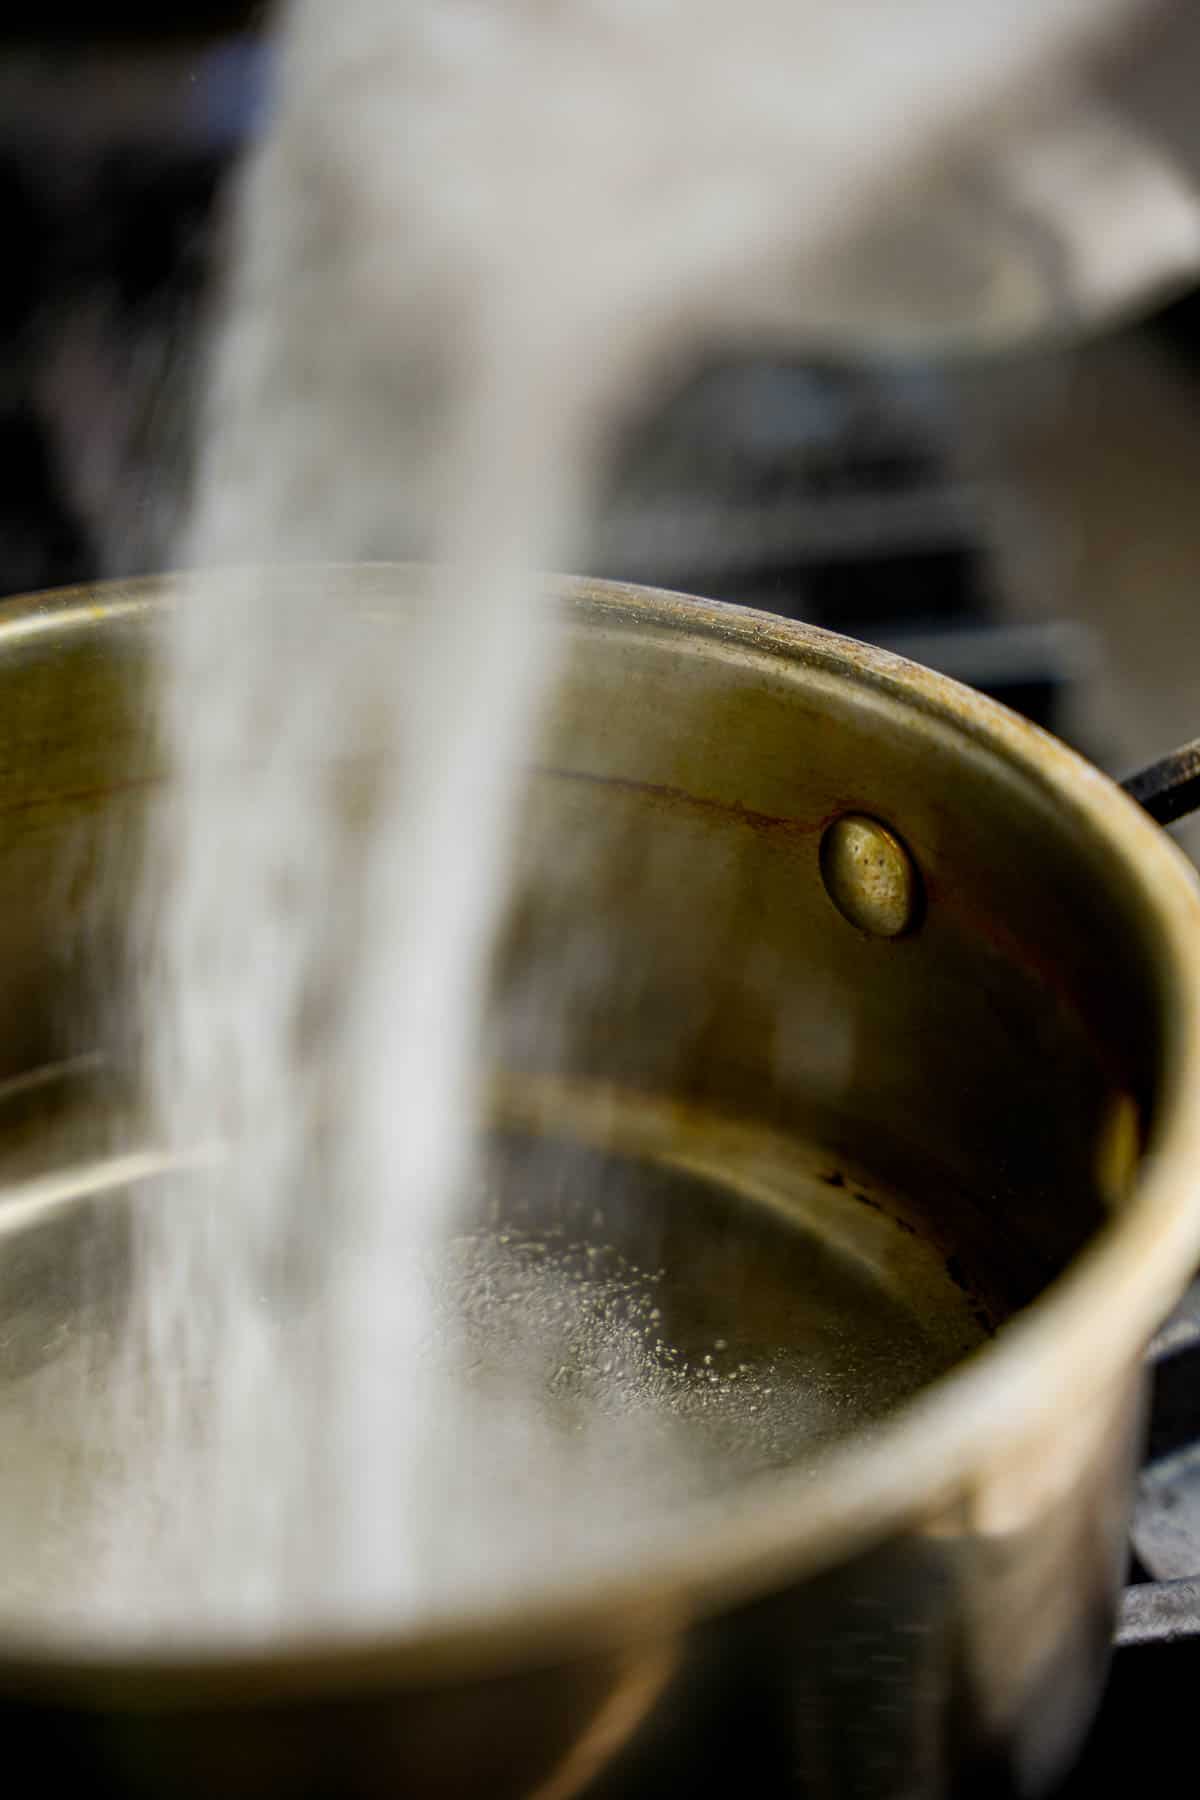 Sugar is poured into water in a saucepan to make sugar syrup for the halvah.